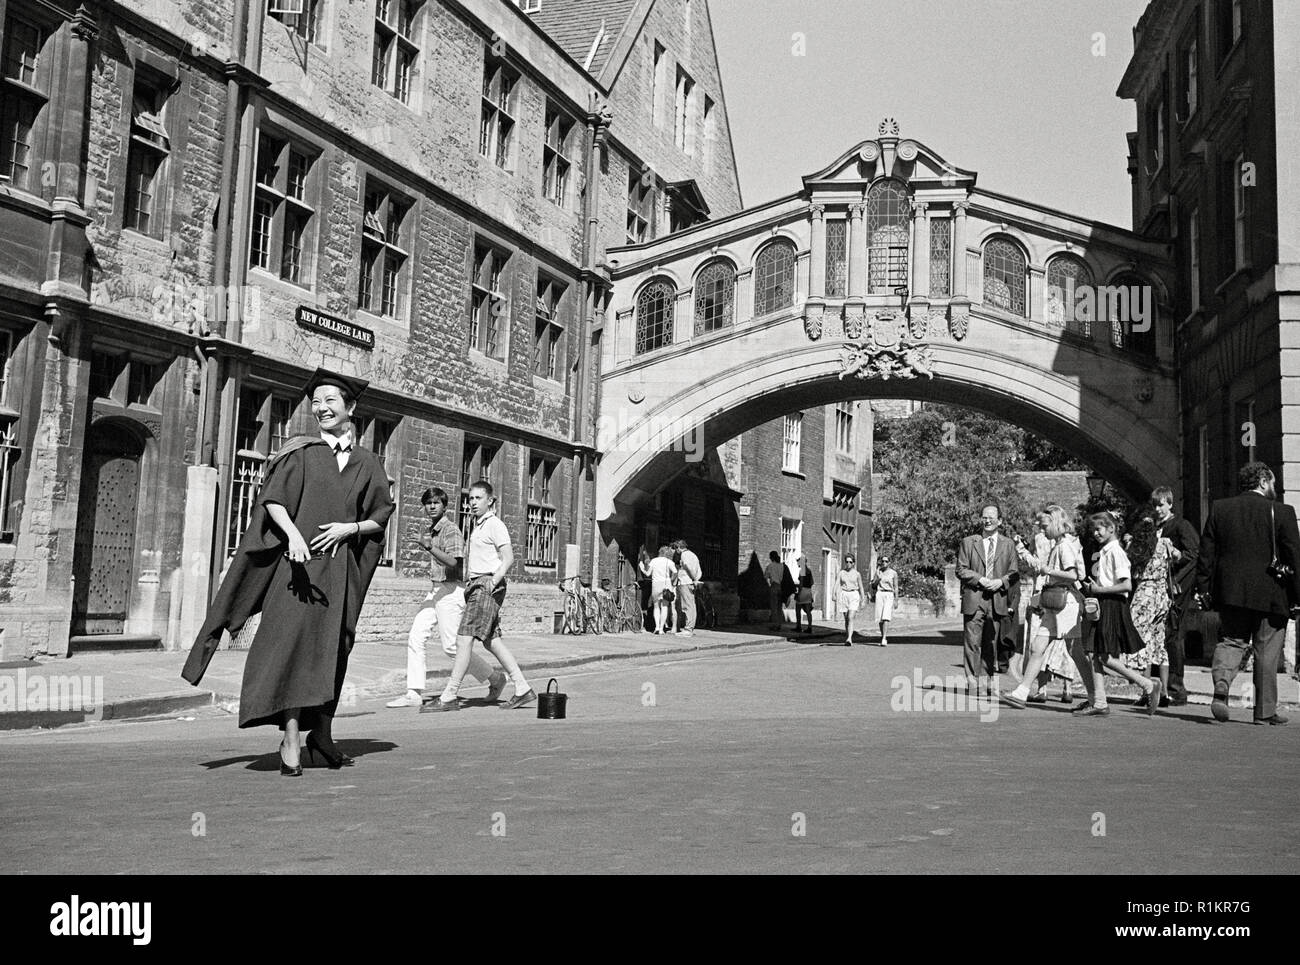 photo: John Angerson Newly graduated student poses for photographs by Bridge of Sighs, New College, University of Oxford, England. Stock Photo